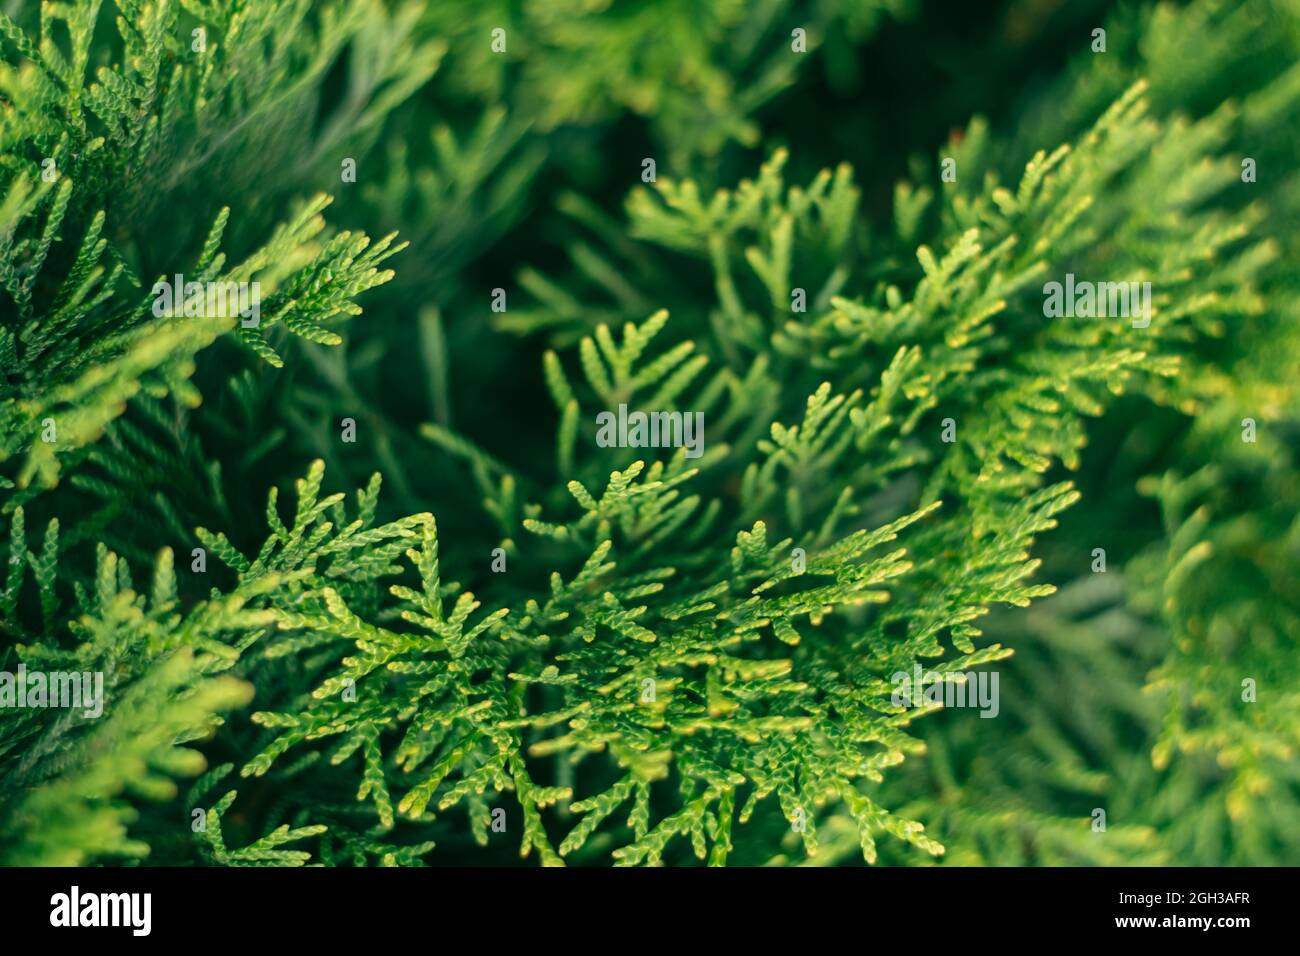 Creative partially blurred background of green thuja branches. Copy space Stock Photo